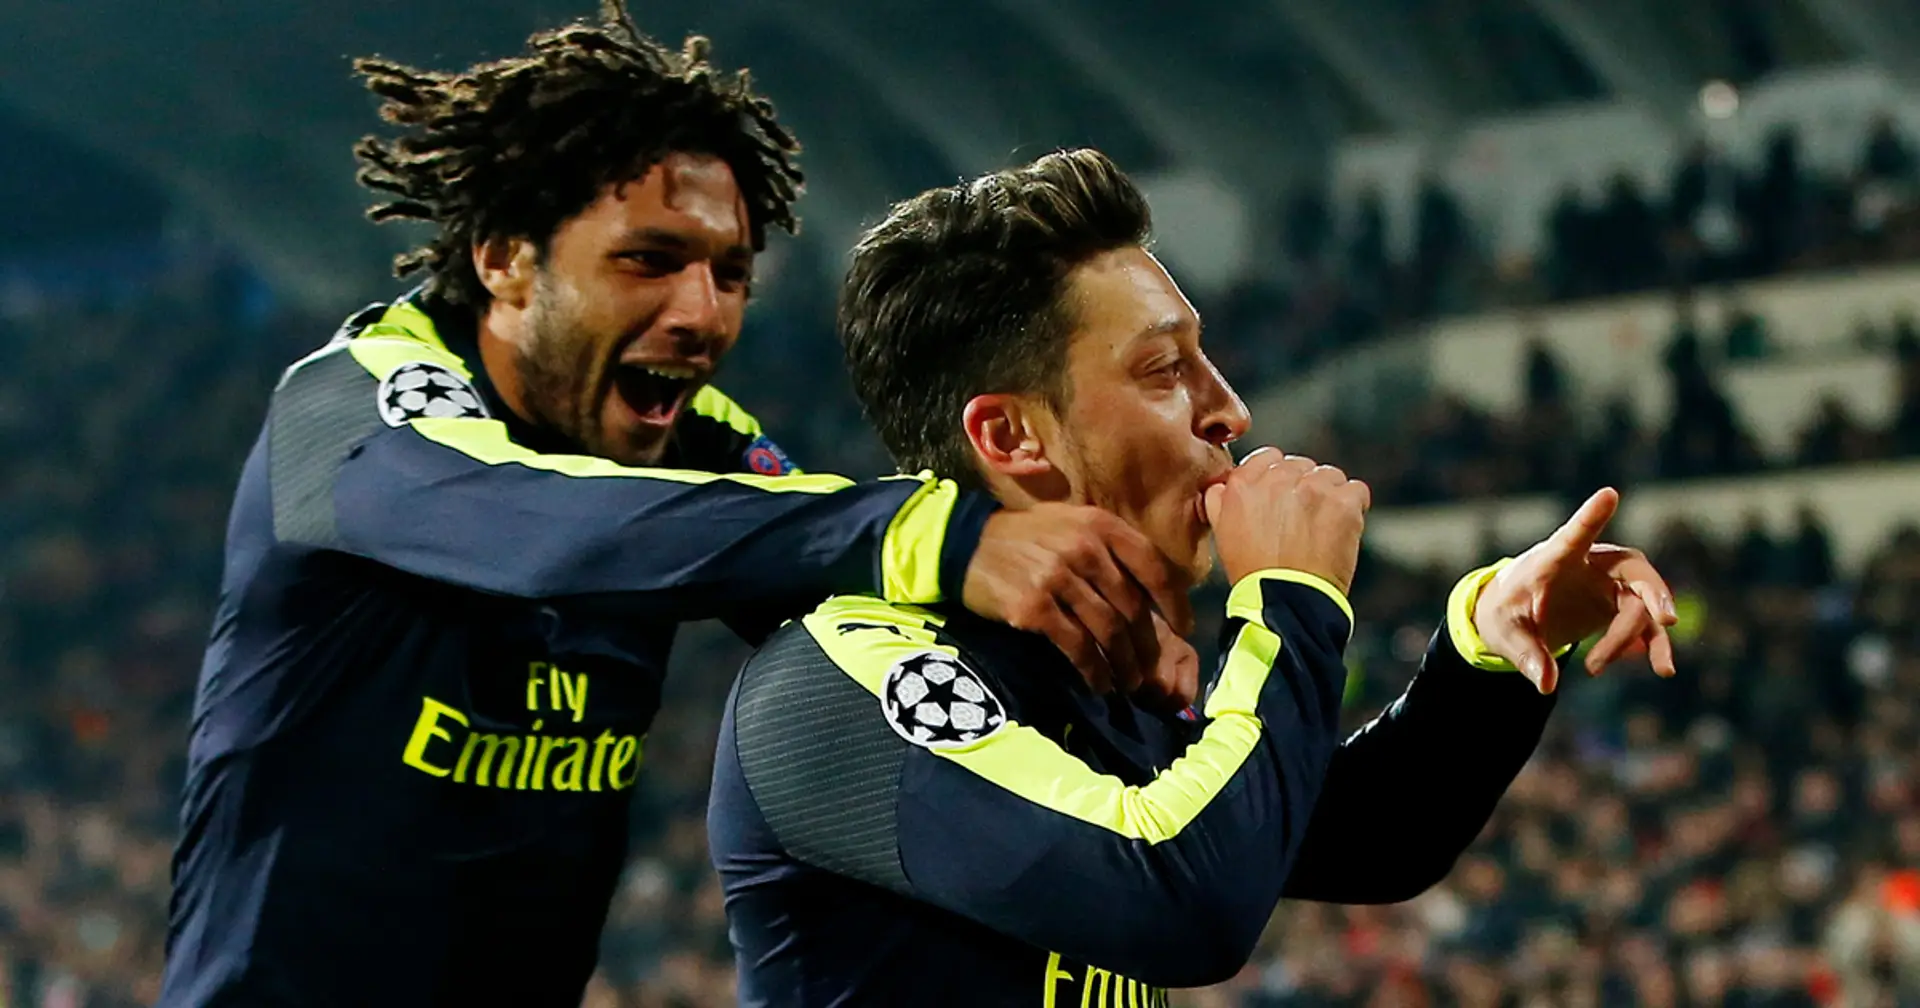 'I have given you the best assist in your career': Elneny sends hilarious parting message to Ozil